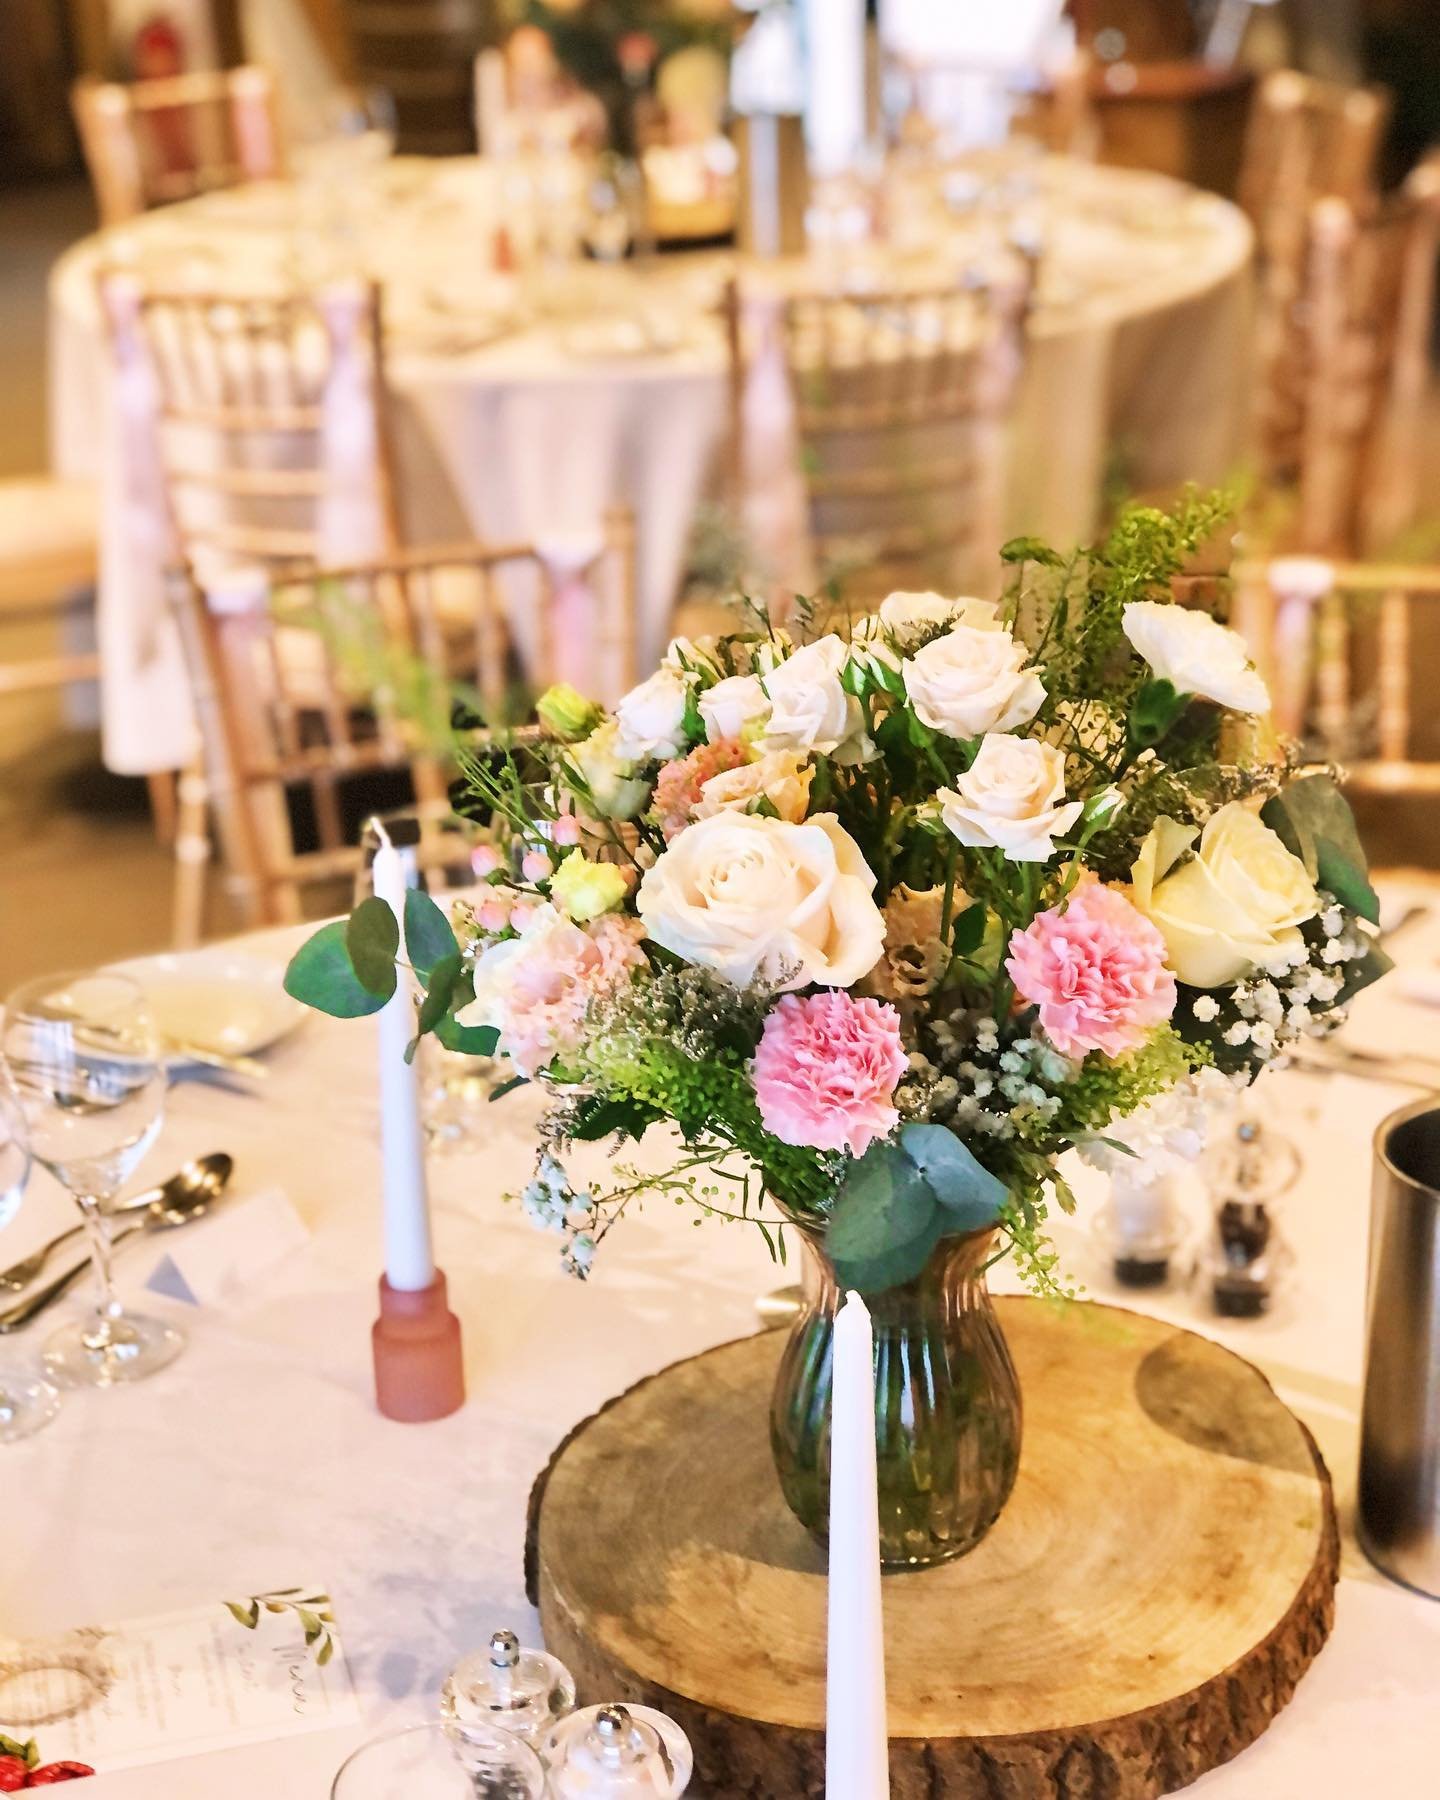 Many congratulations to G &amp; B on their big day yesterday at South Farm in Royston.
 
The couple chose a wonderful mix of pinks, cream and peach for their wedding flowers 🌸